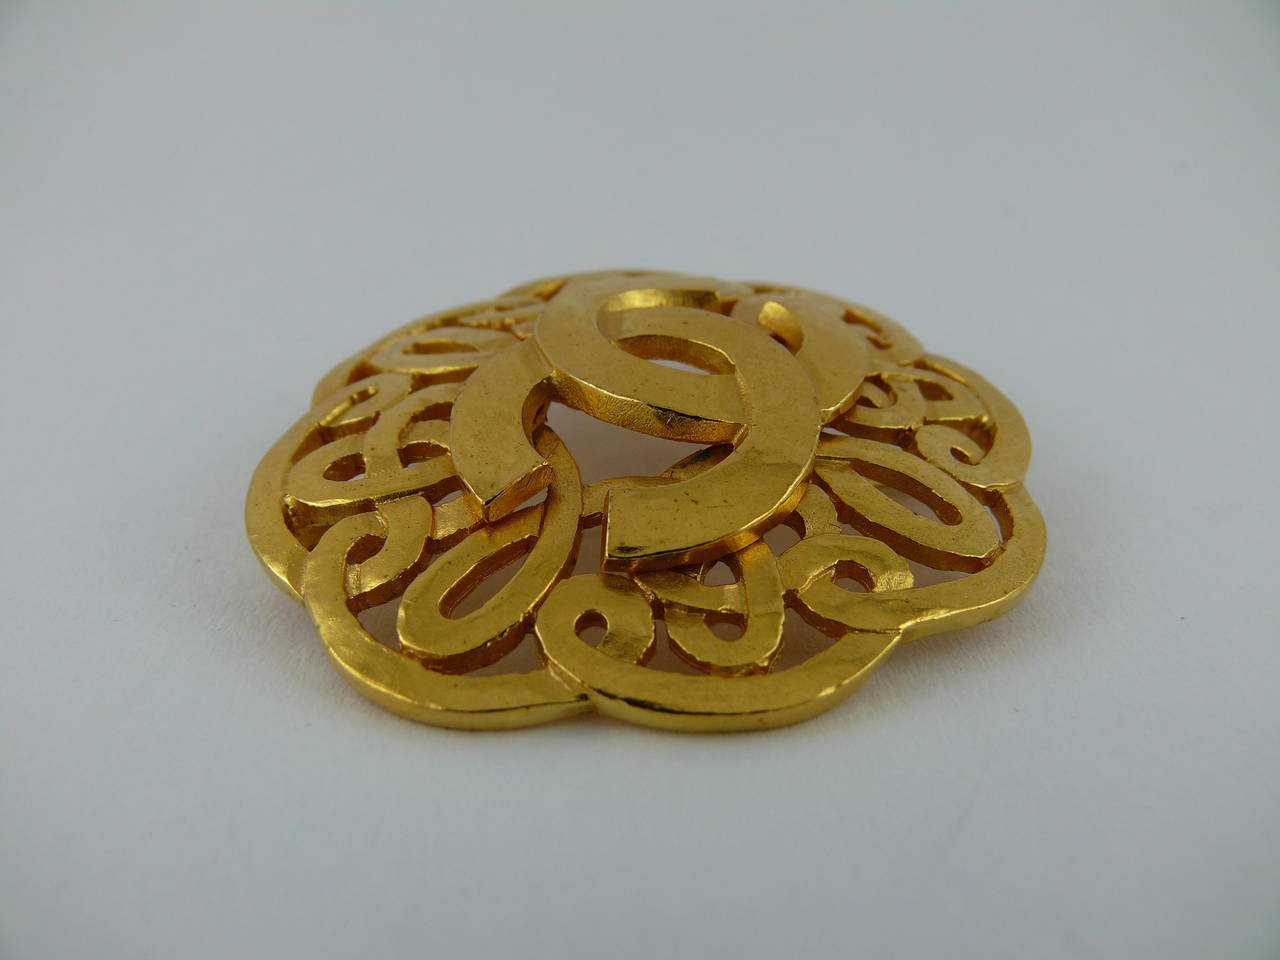 CHANEL vintage CC logo matte gold toned openwork brooch.

Spring/Summer 1997 Collection.

Marked Chanel 97P Made in France.

JEWELRY CONDITION CHART
- New or never worn : item is in pristine condition with no noticeable imperfections
- Excellent :